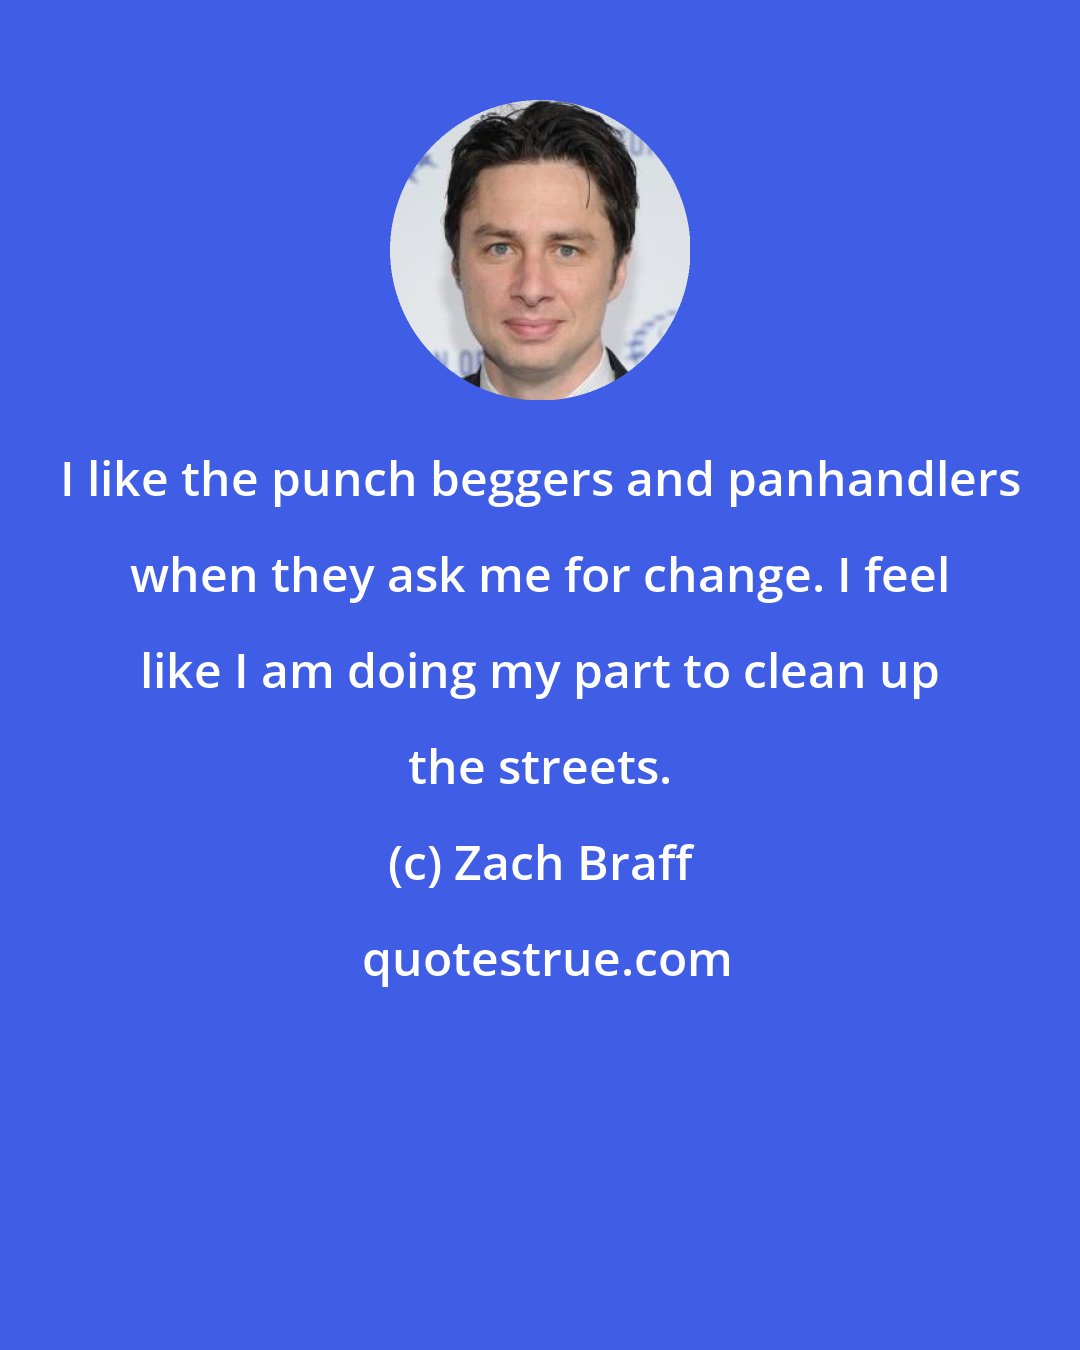 Zach Braff: I like the punch beggers and panhandlers when they ask me for change. I feel like I am doing my part to clean up the streets.